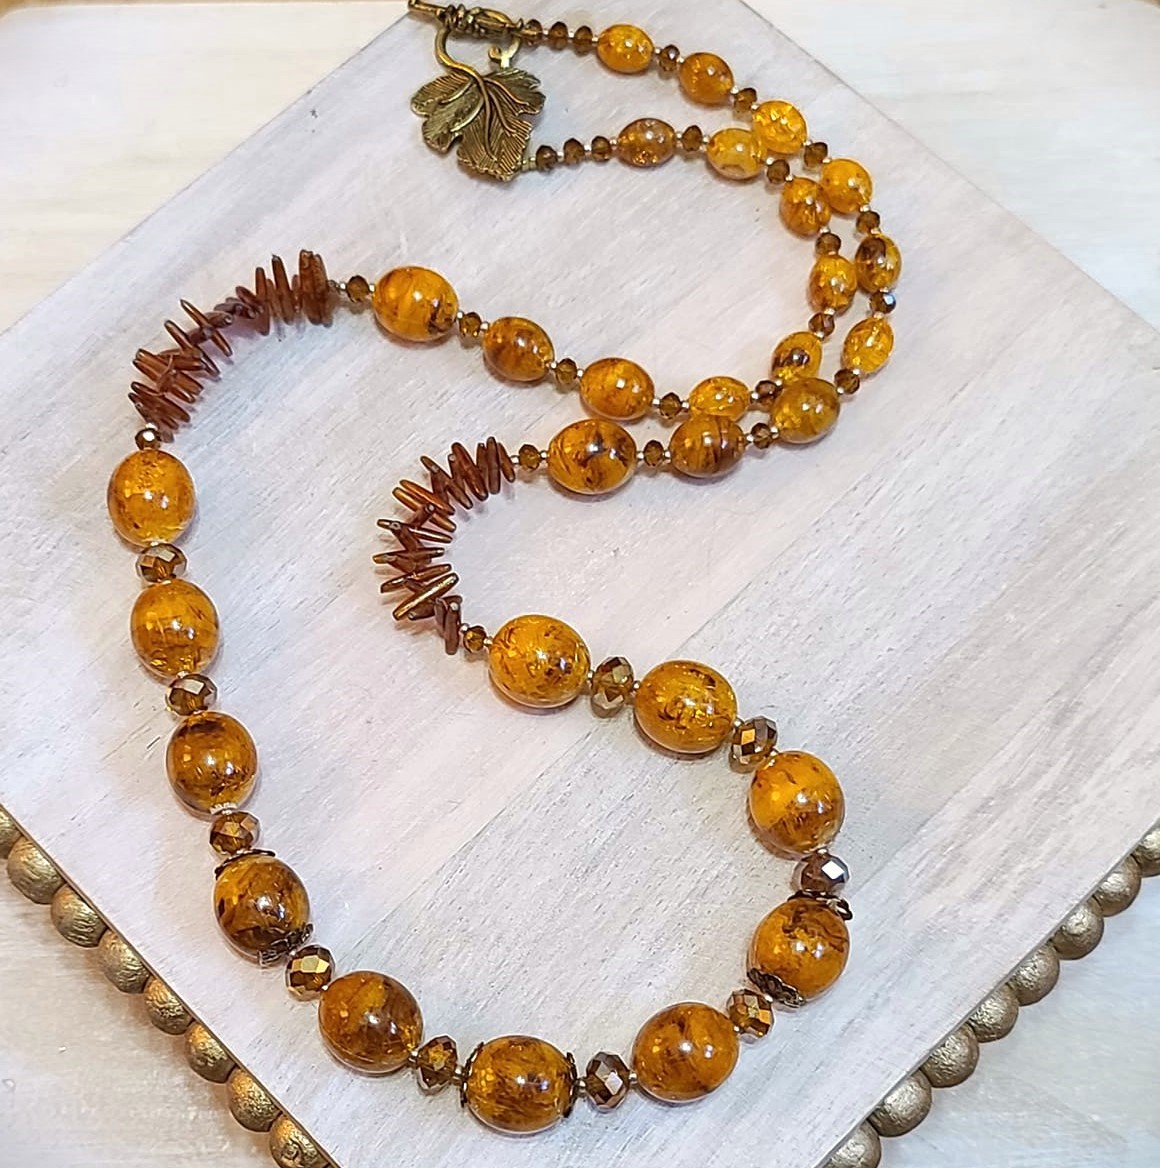 Handcrafted necklace, butterscotch swirled beads, crystal, coral